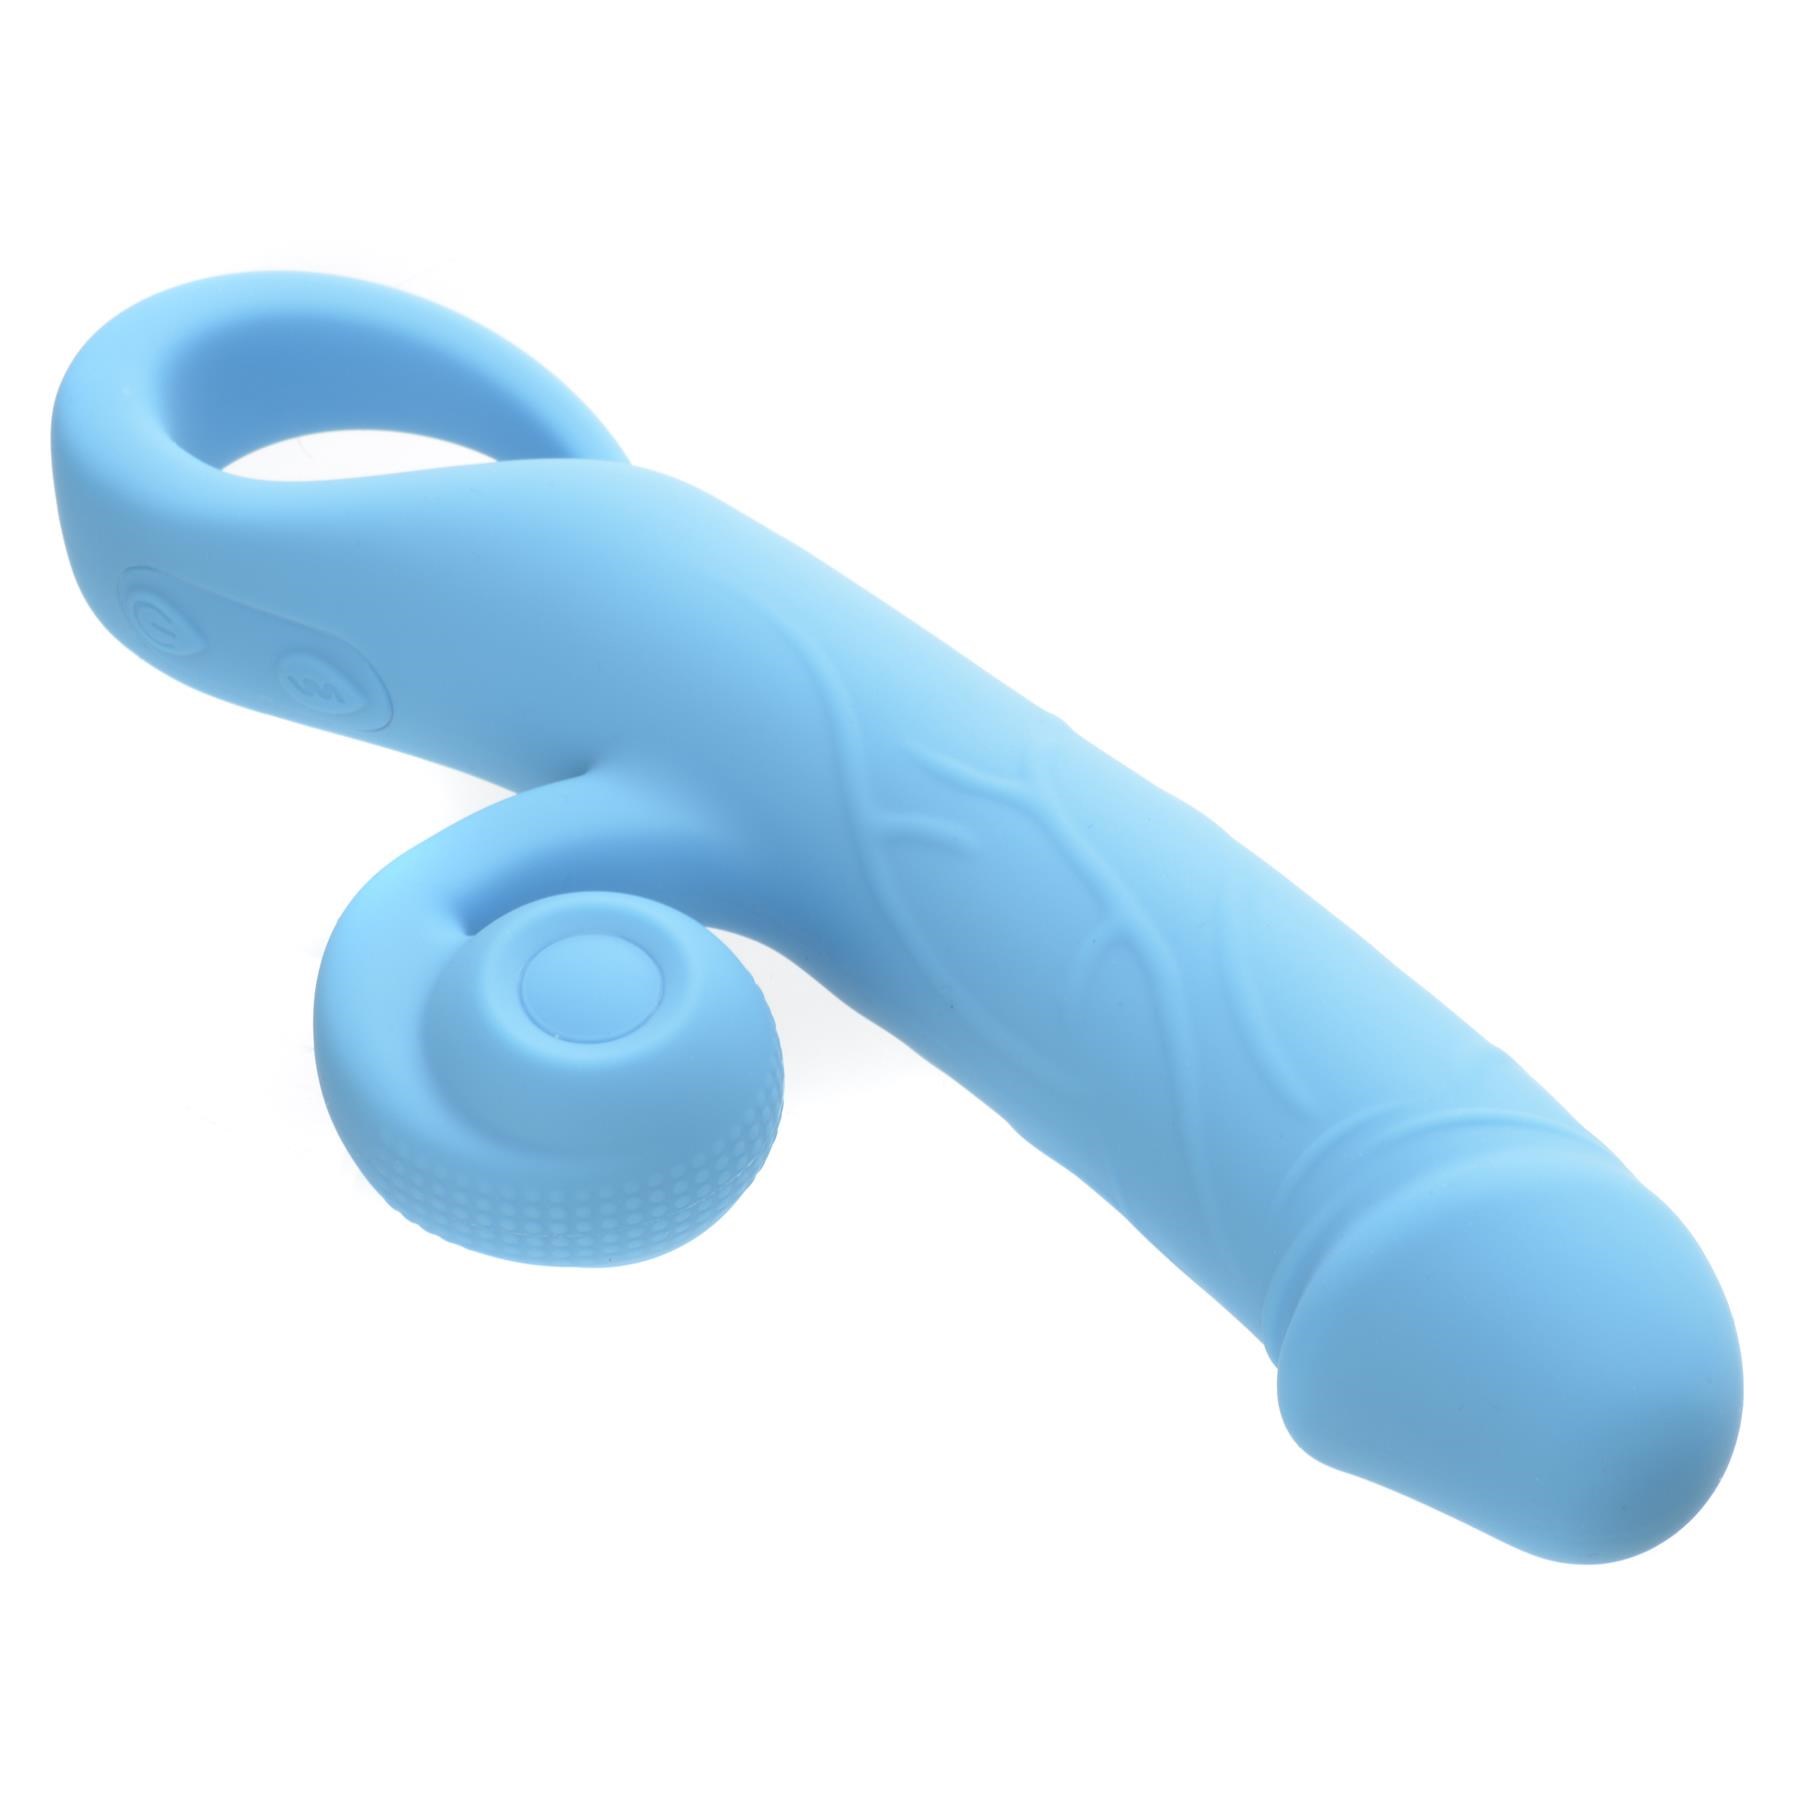 Realistic Rechargeable Vibrator with Clit Bumper - Product Shot #2